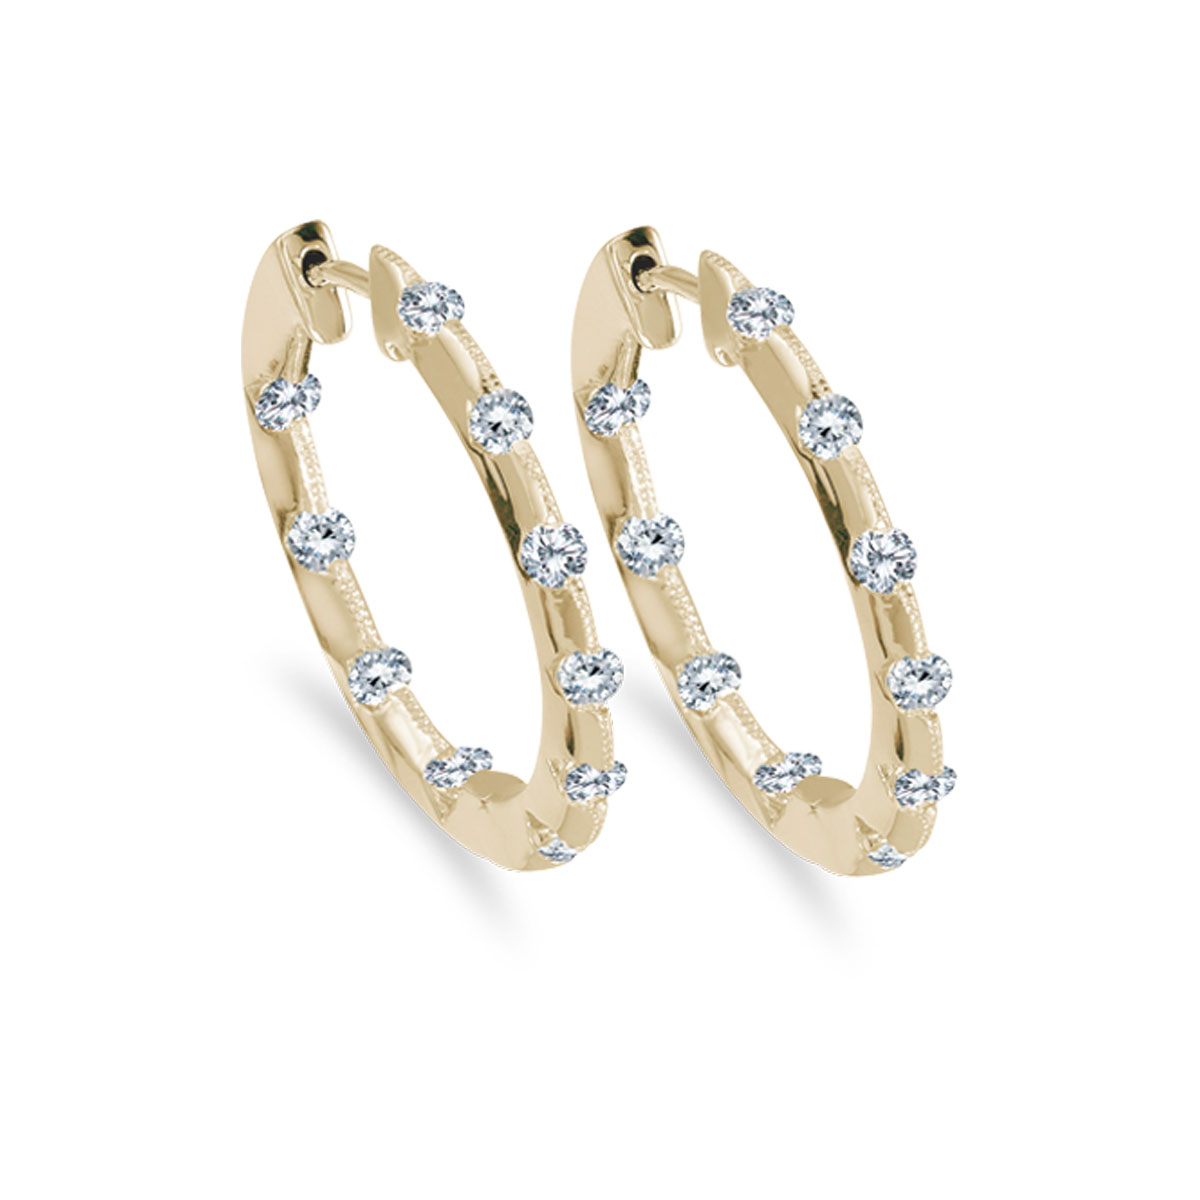 24 mm diamond inside/outside hoop earrings in beautiful 14k yellow gold. The perfect look for day...